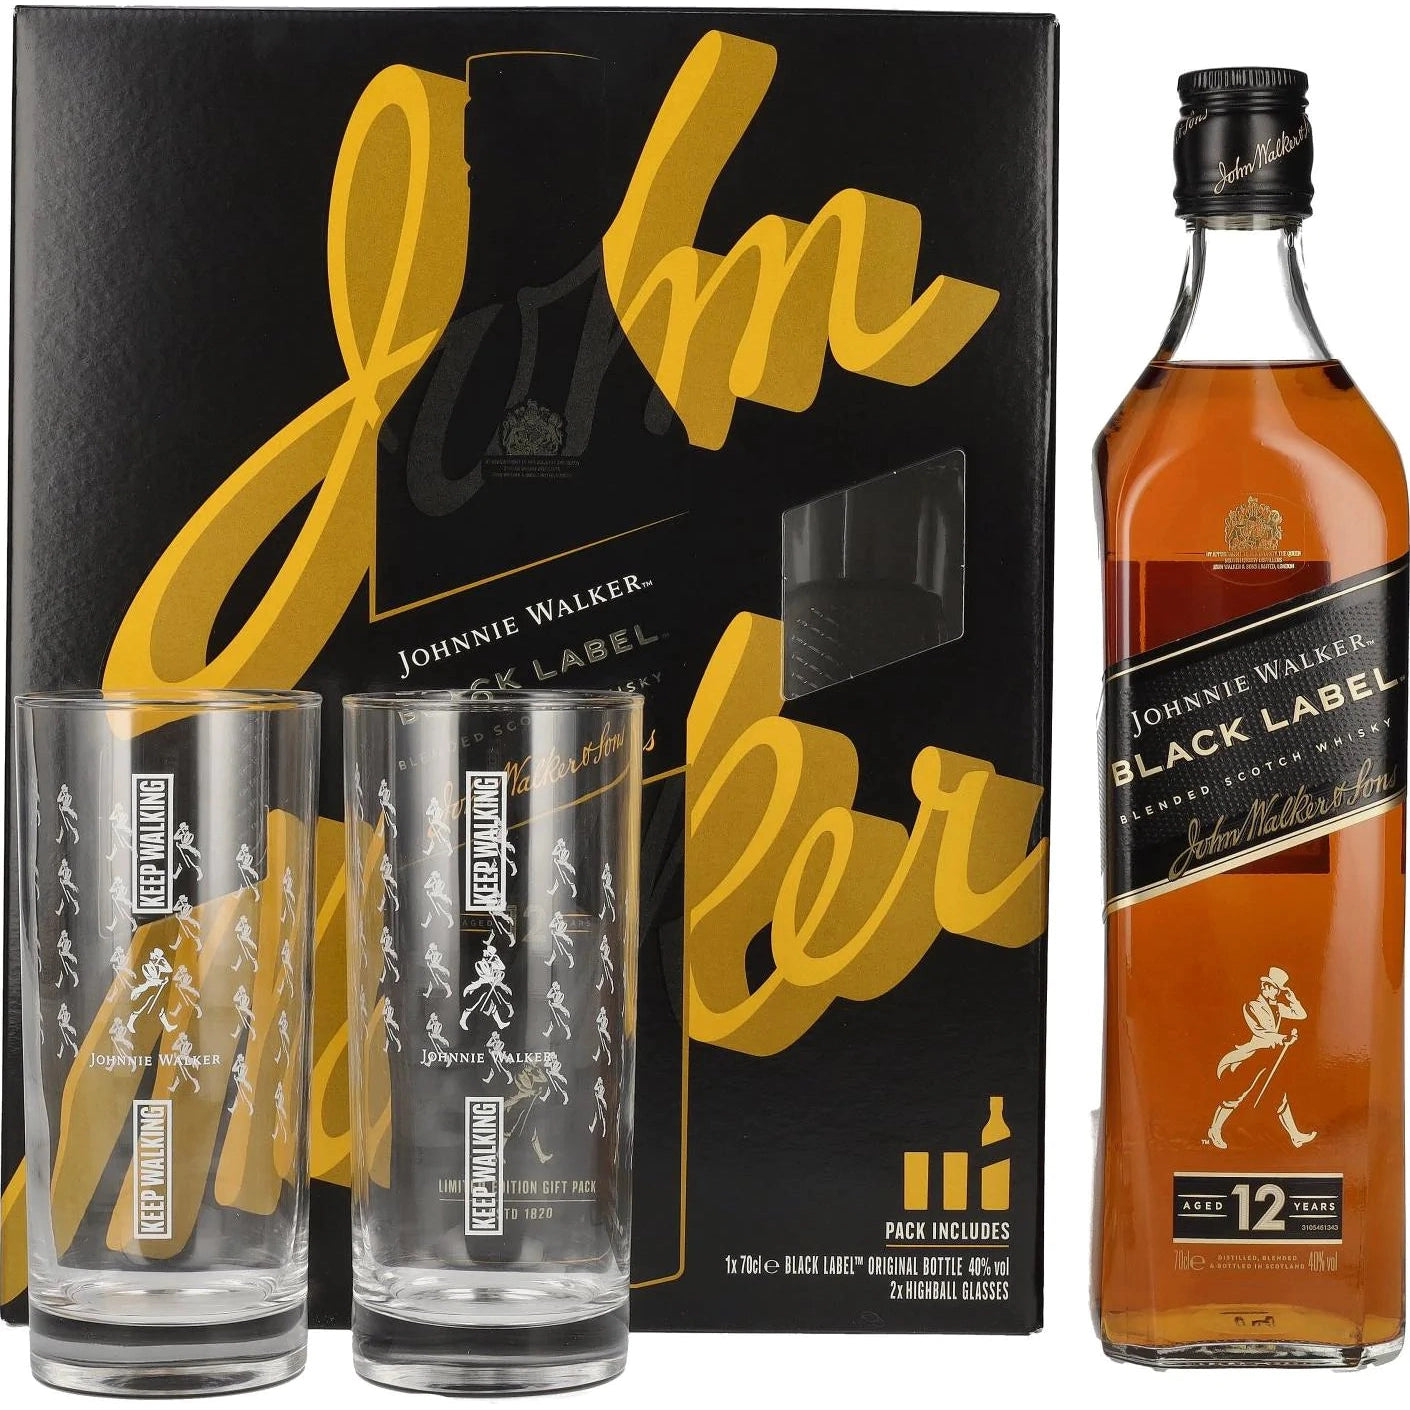 Johnnie Walker BLACK LABEL 12 Years Old 40% Vol. 0,7l in Giftbox with